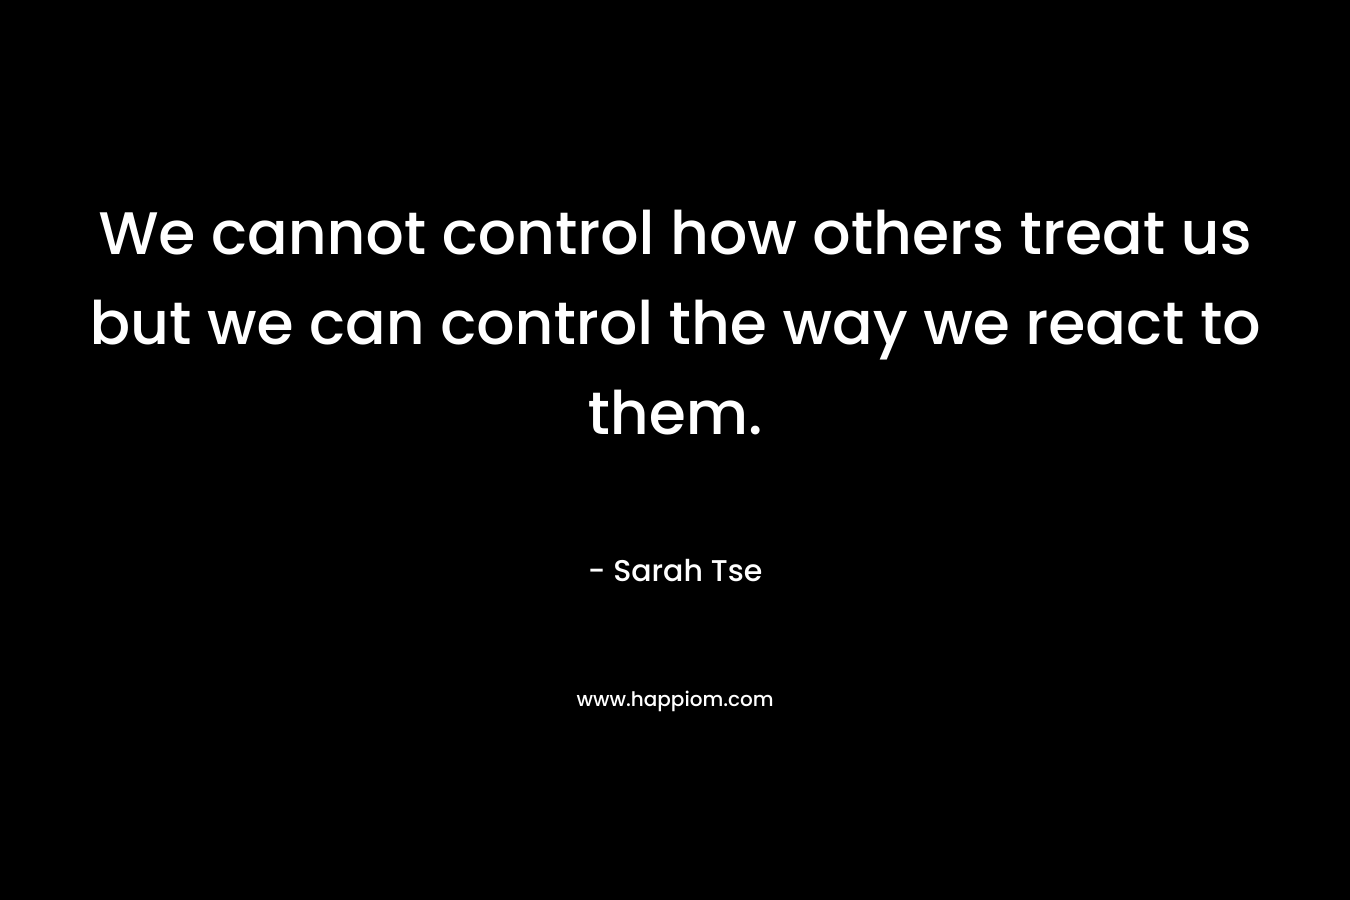 We cannot control how others treat us but we can control the way we react to them. – Sarah Tse